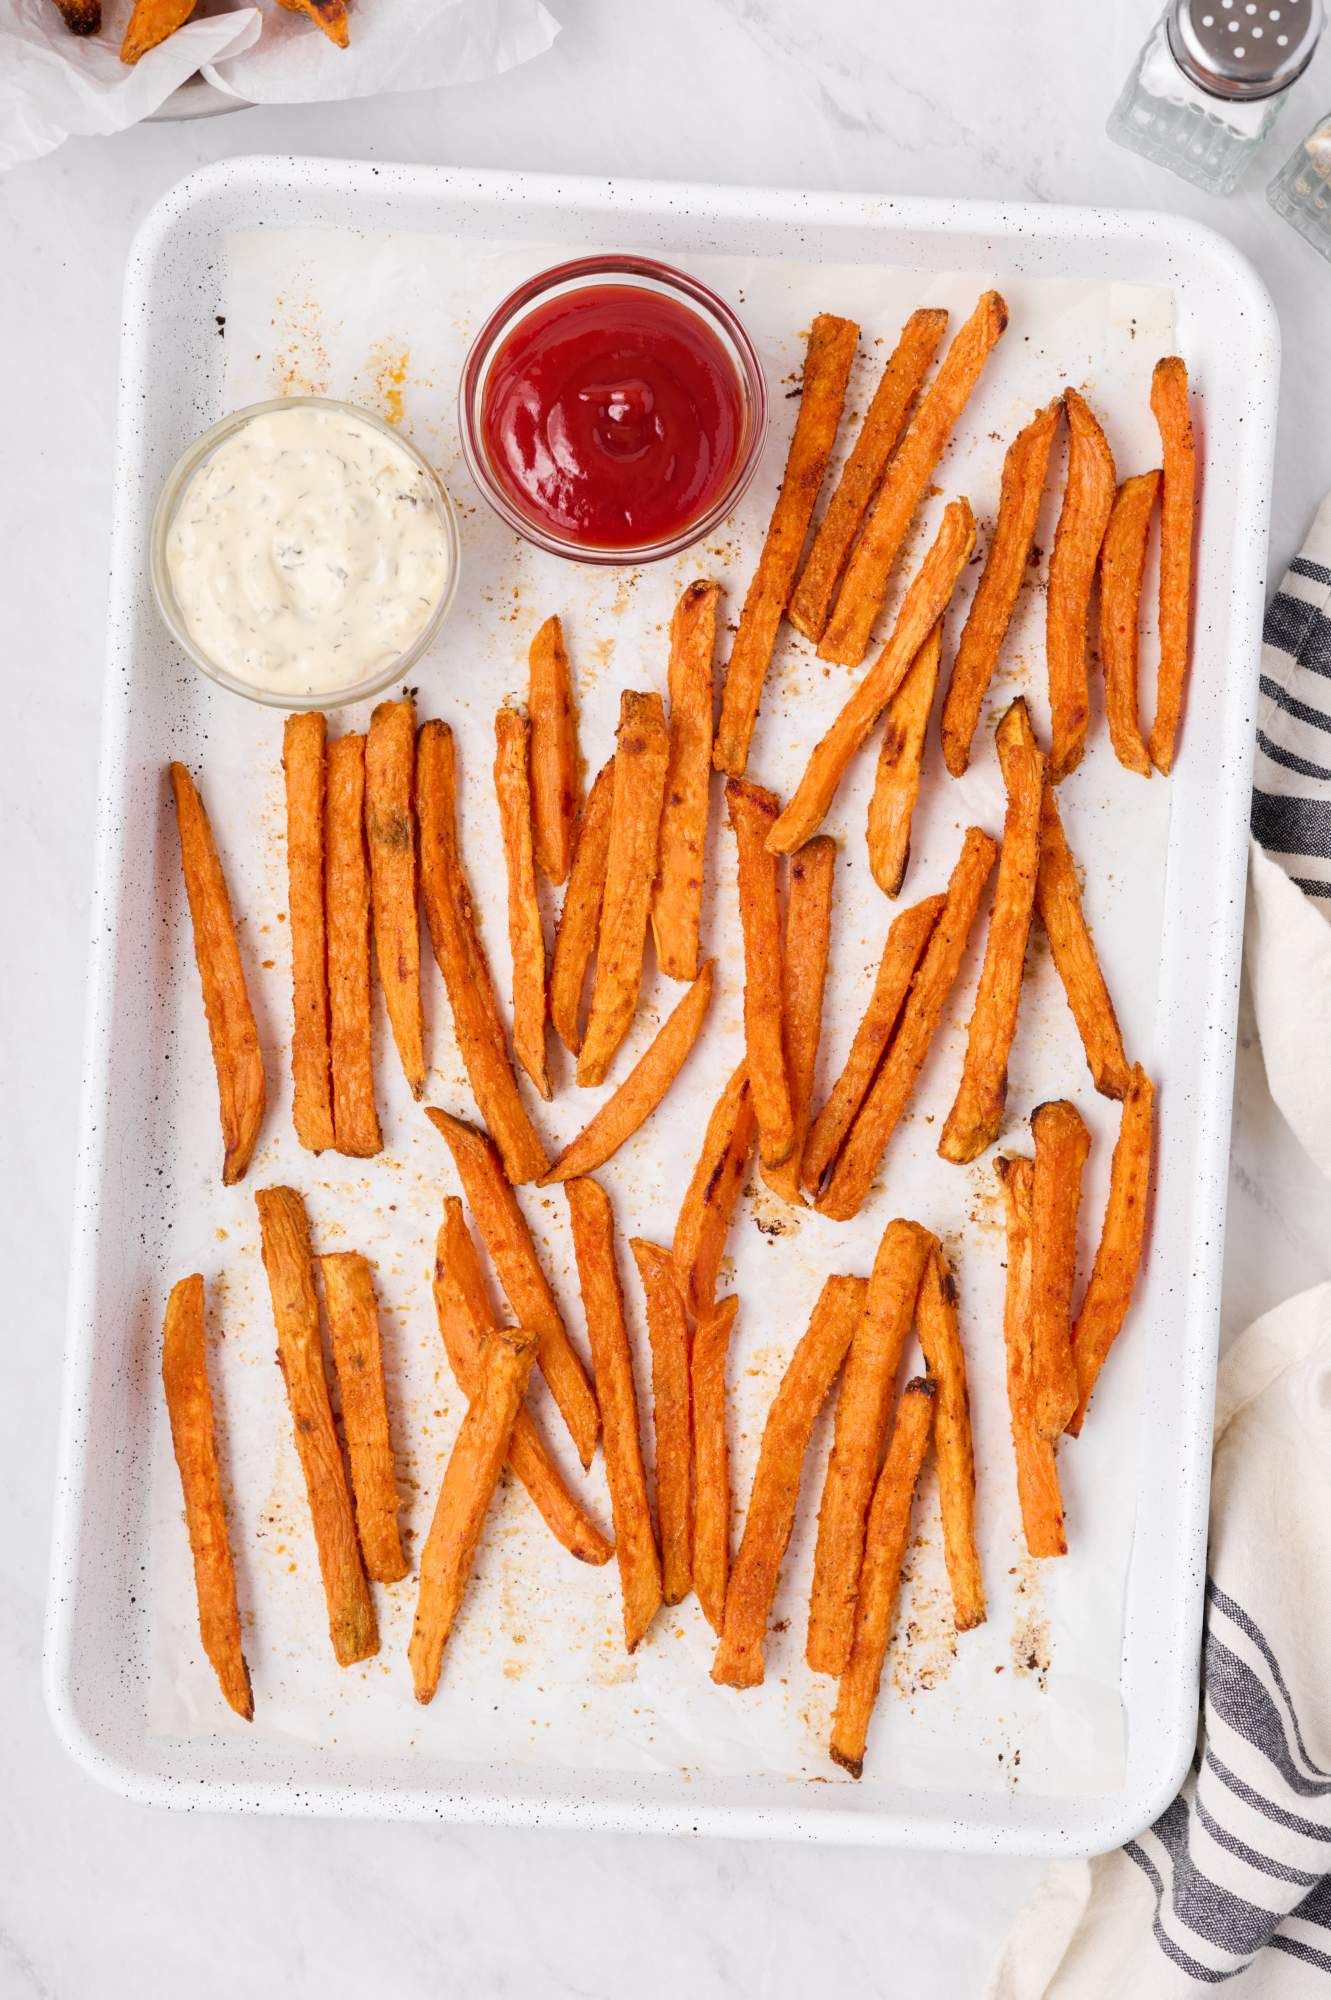 Crispy baked sweet potato french fries on a baking sheet with ketchup and ranch dip.